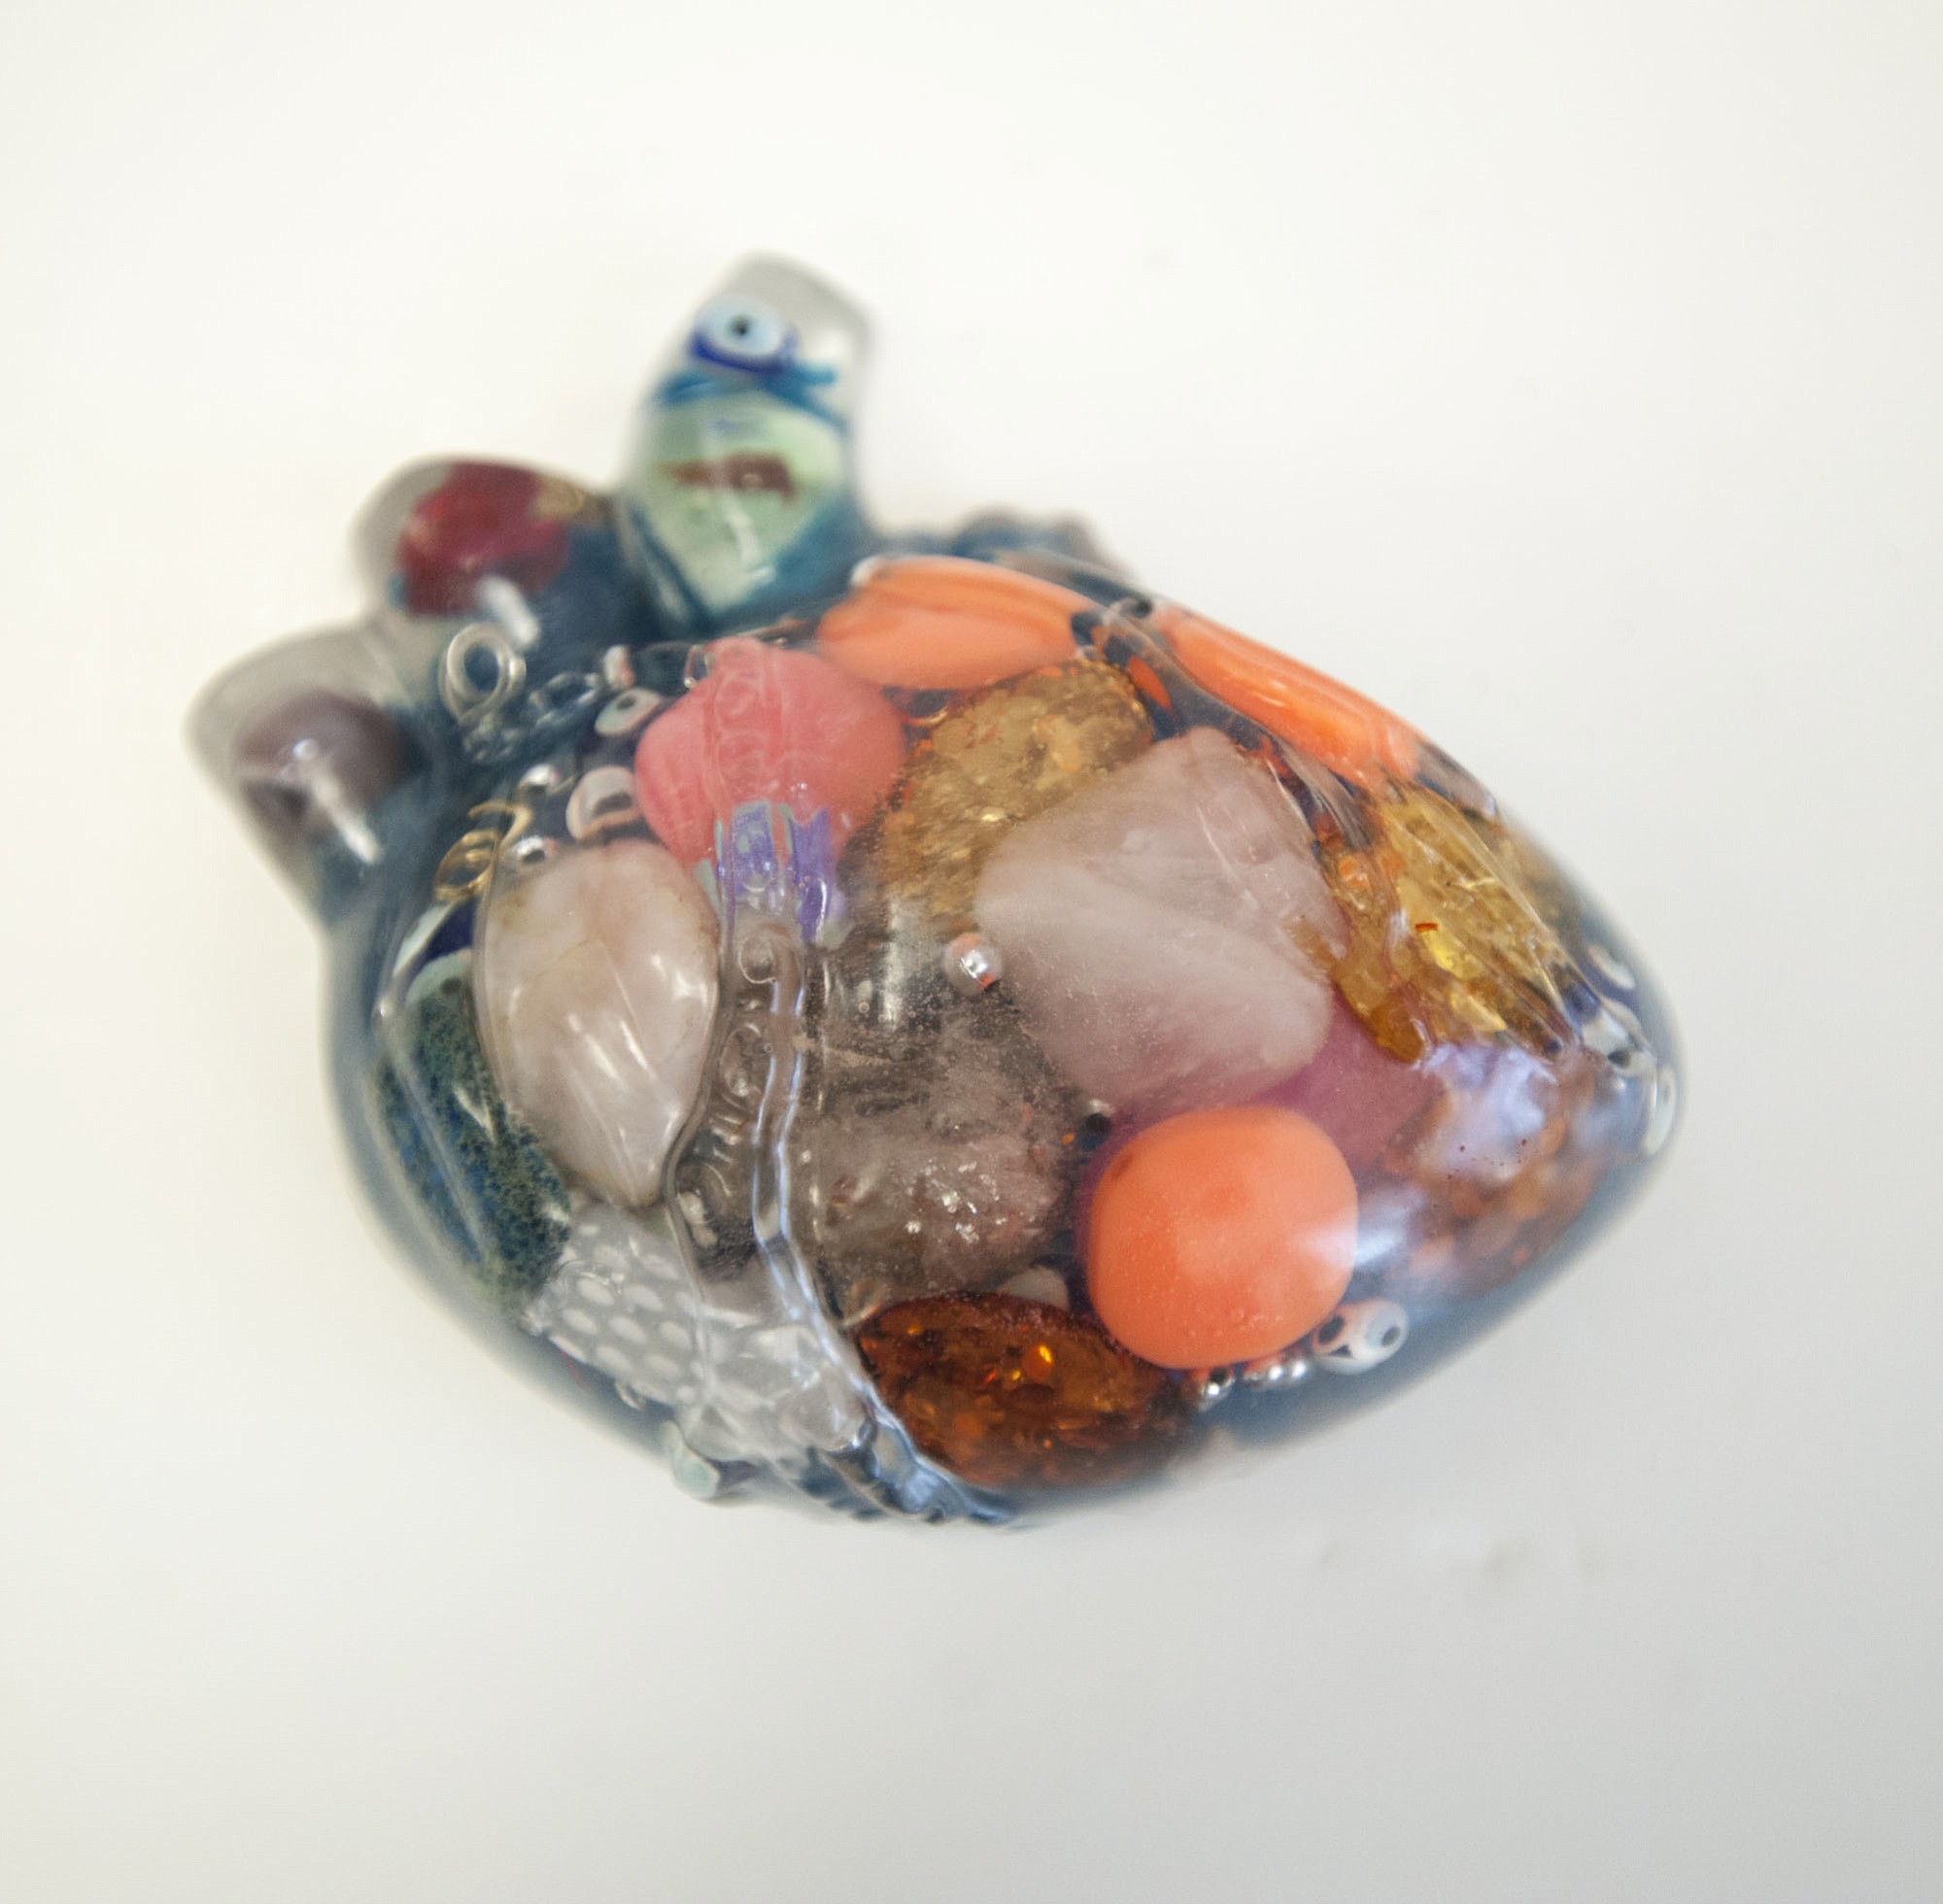 Laura Velarde put jewelry-making leftovers into an anatomically correct heart-shaped gelatin mold and filled it with resin.